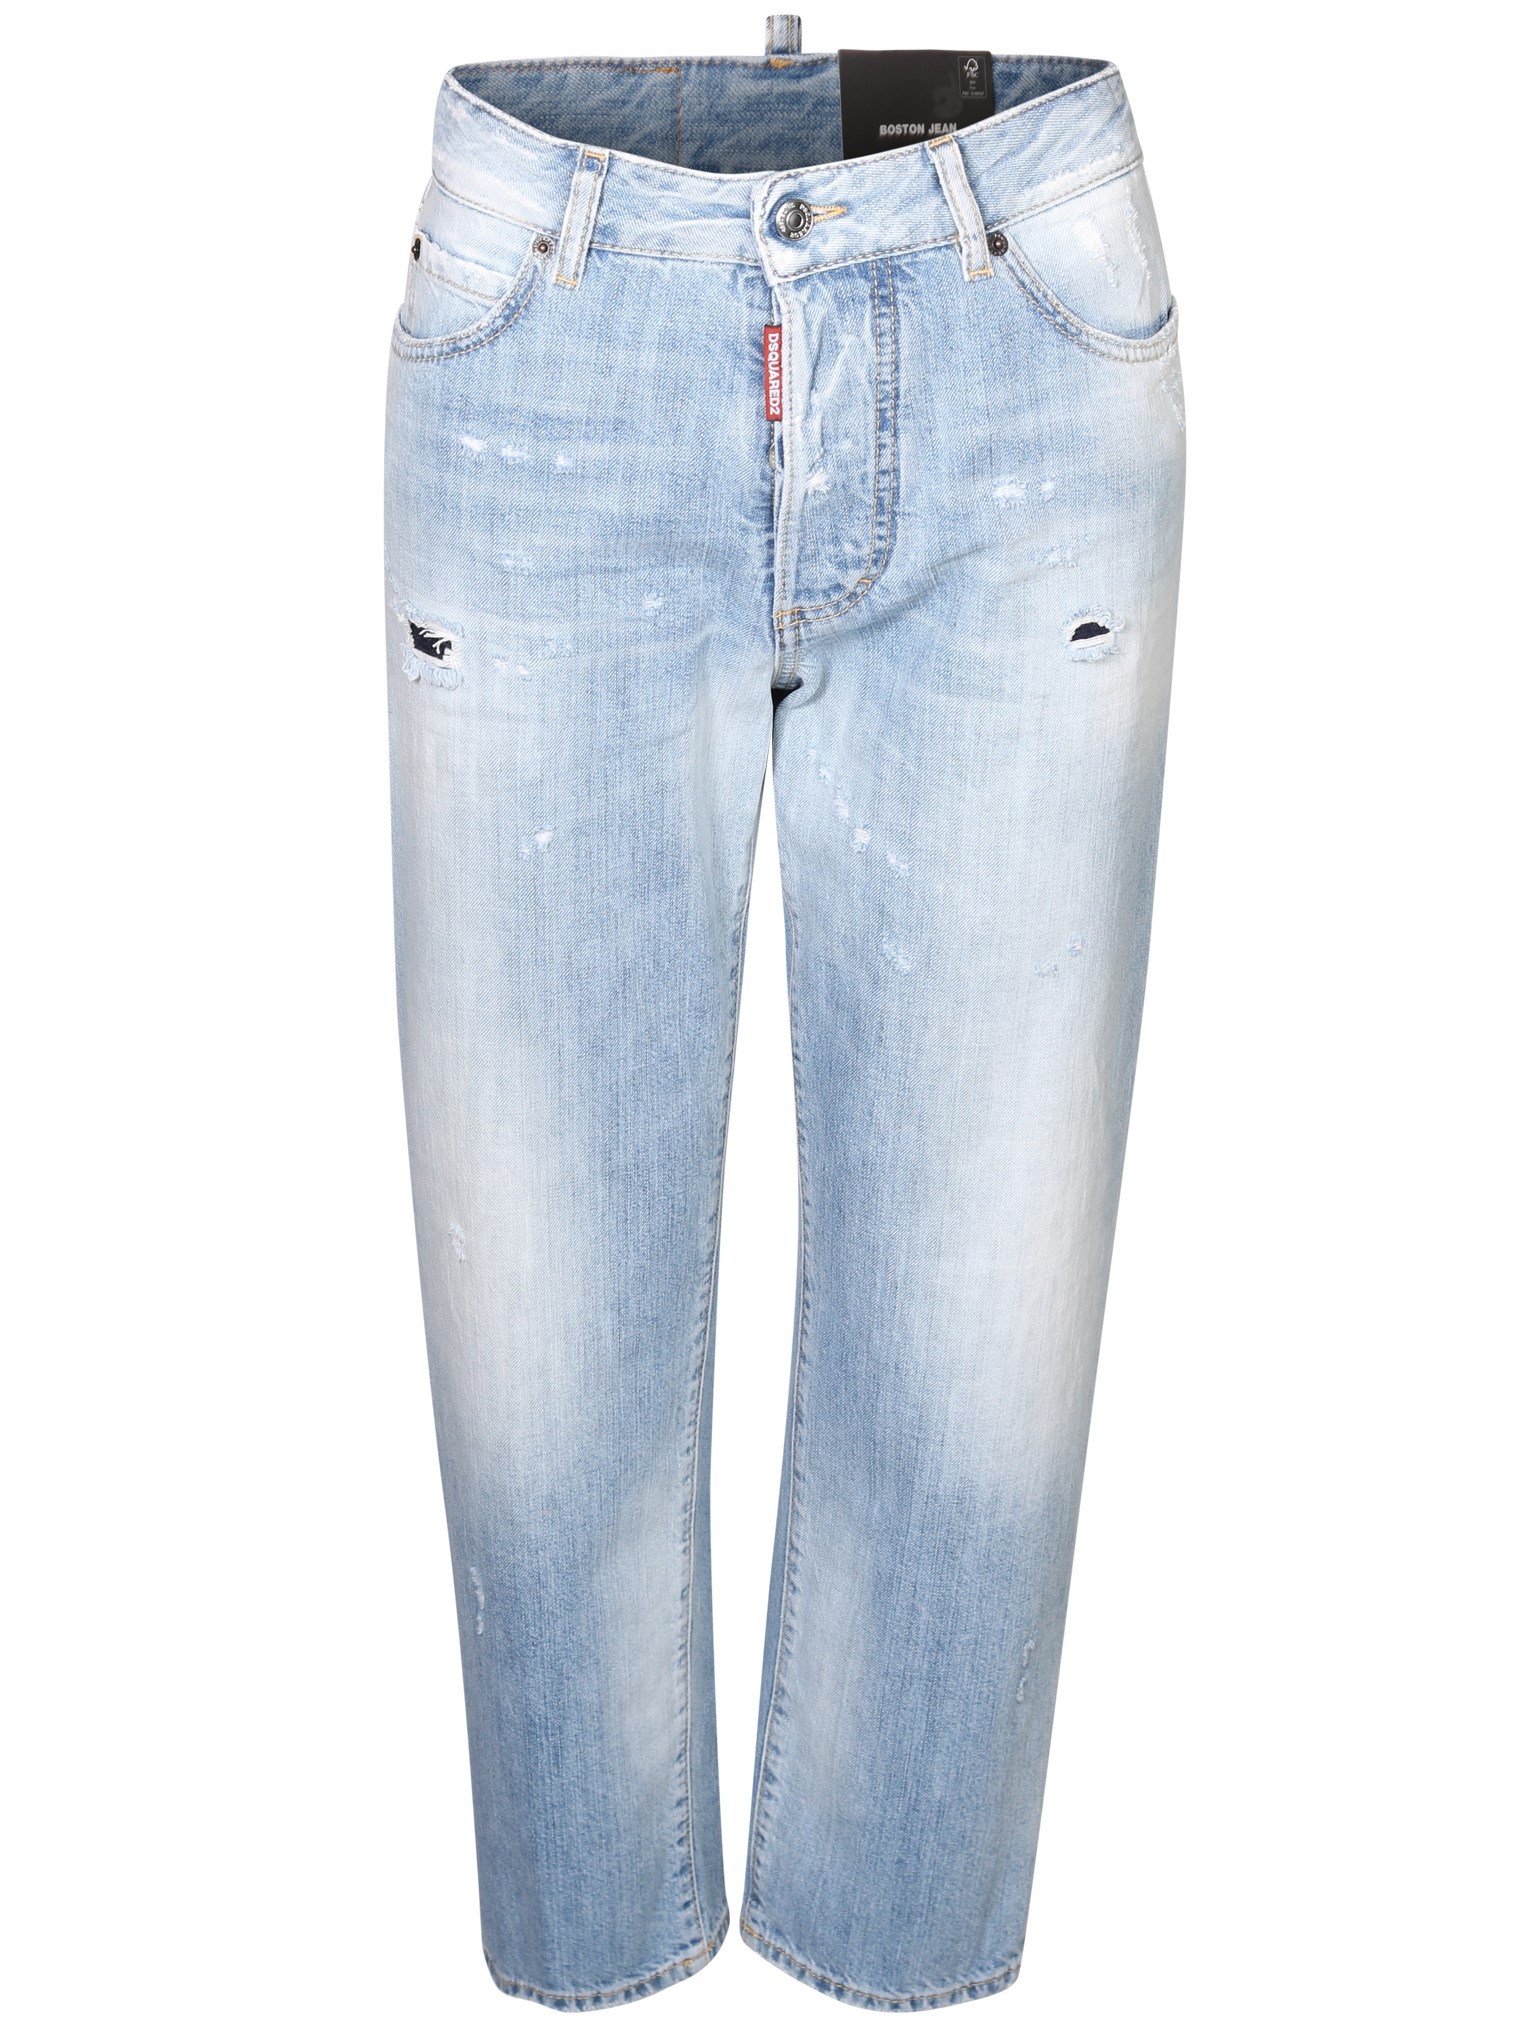 DSQUARED2 Boston Jeans in Washed Light Blue